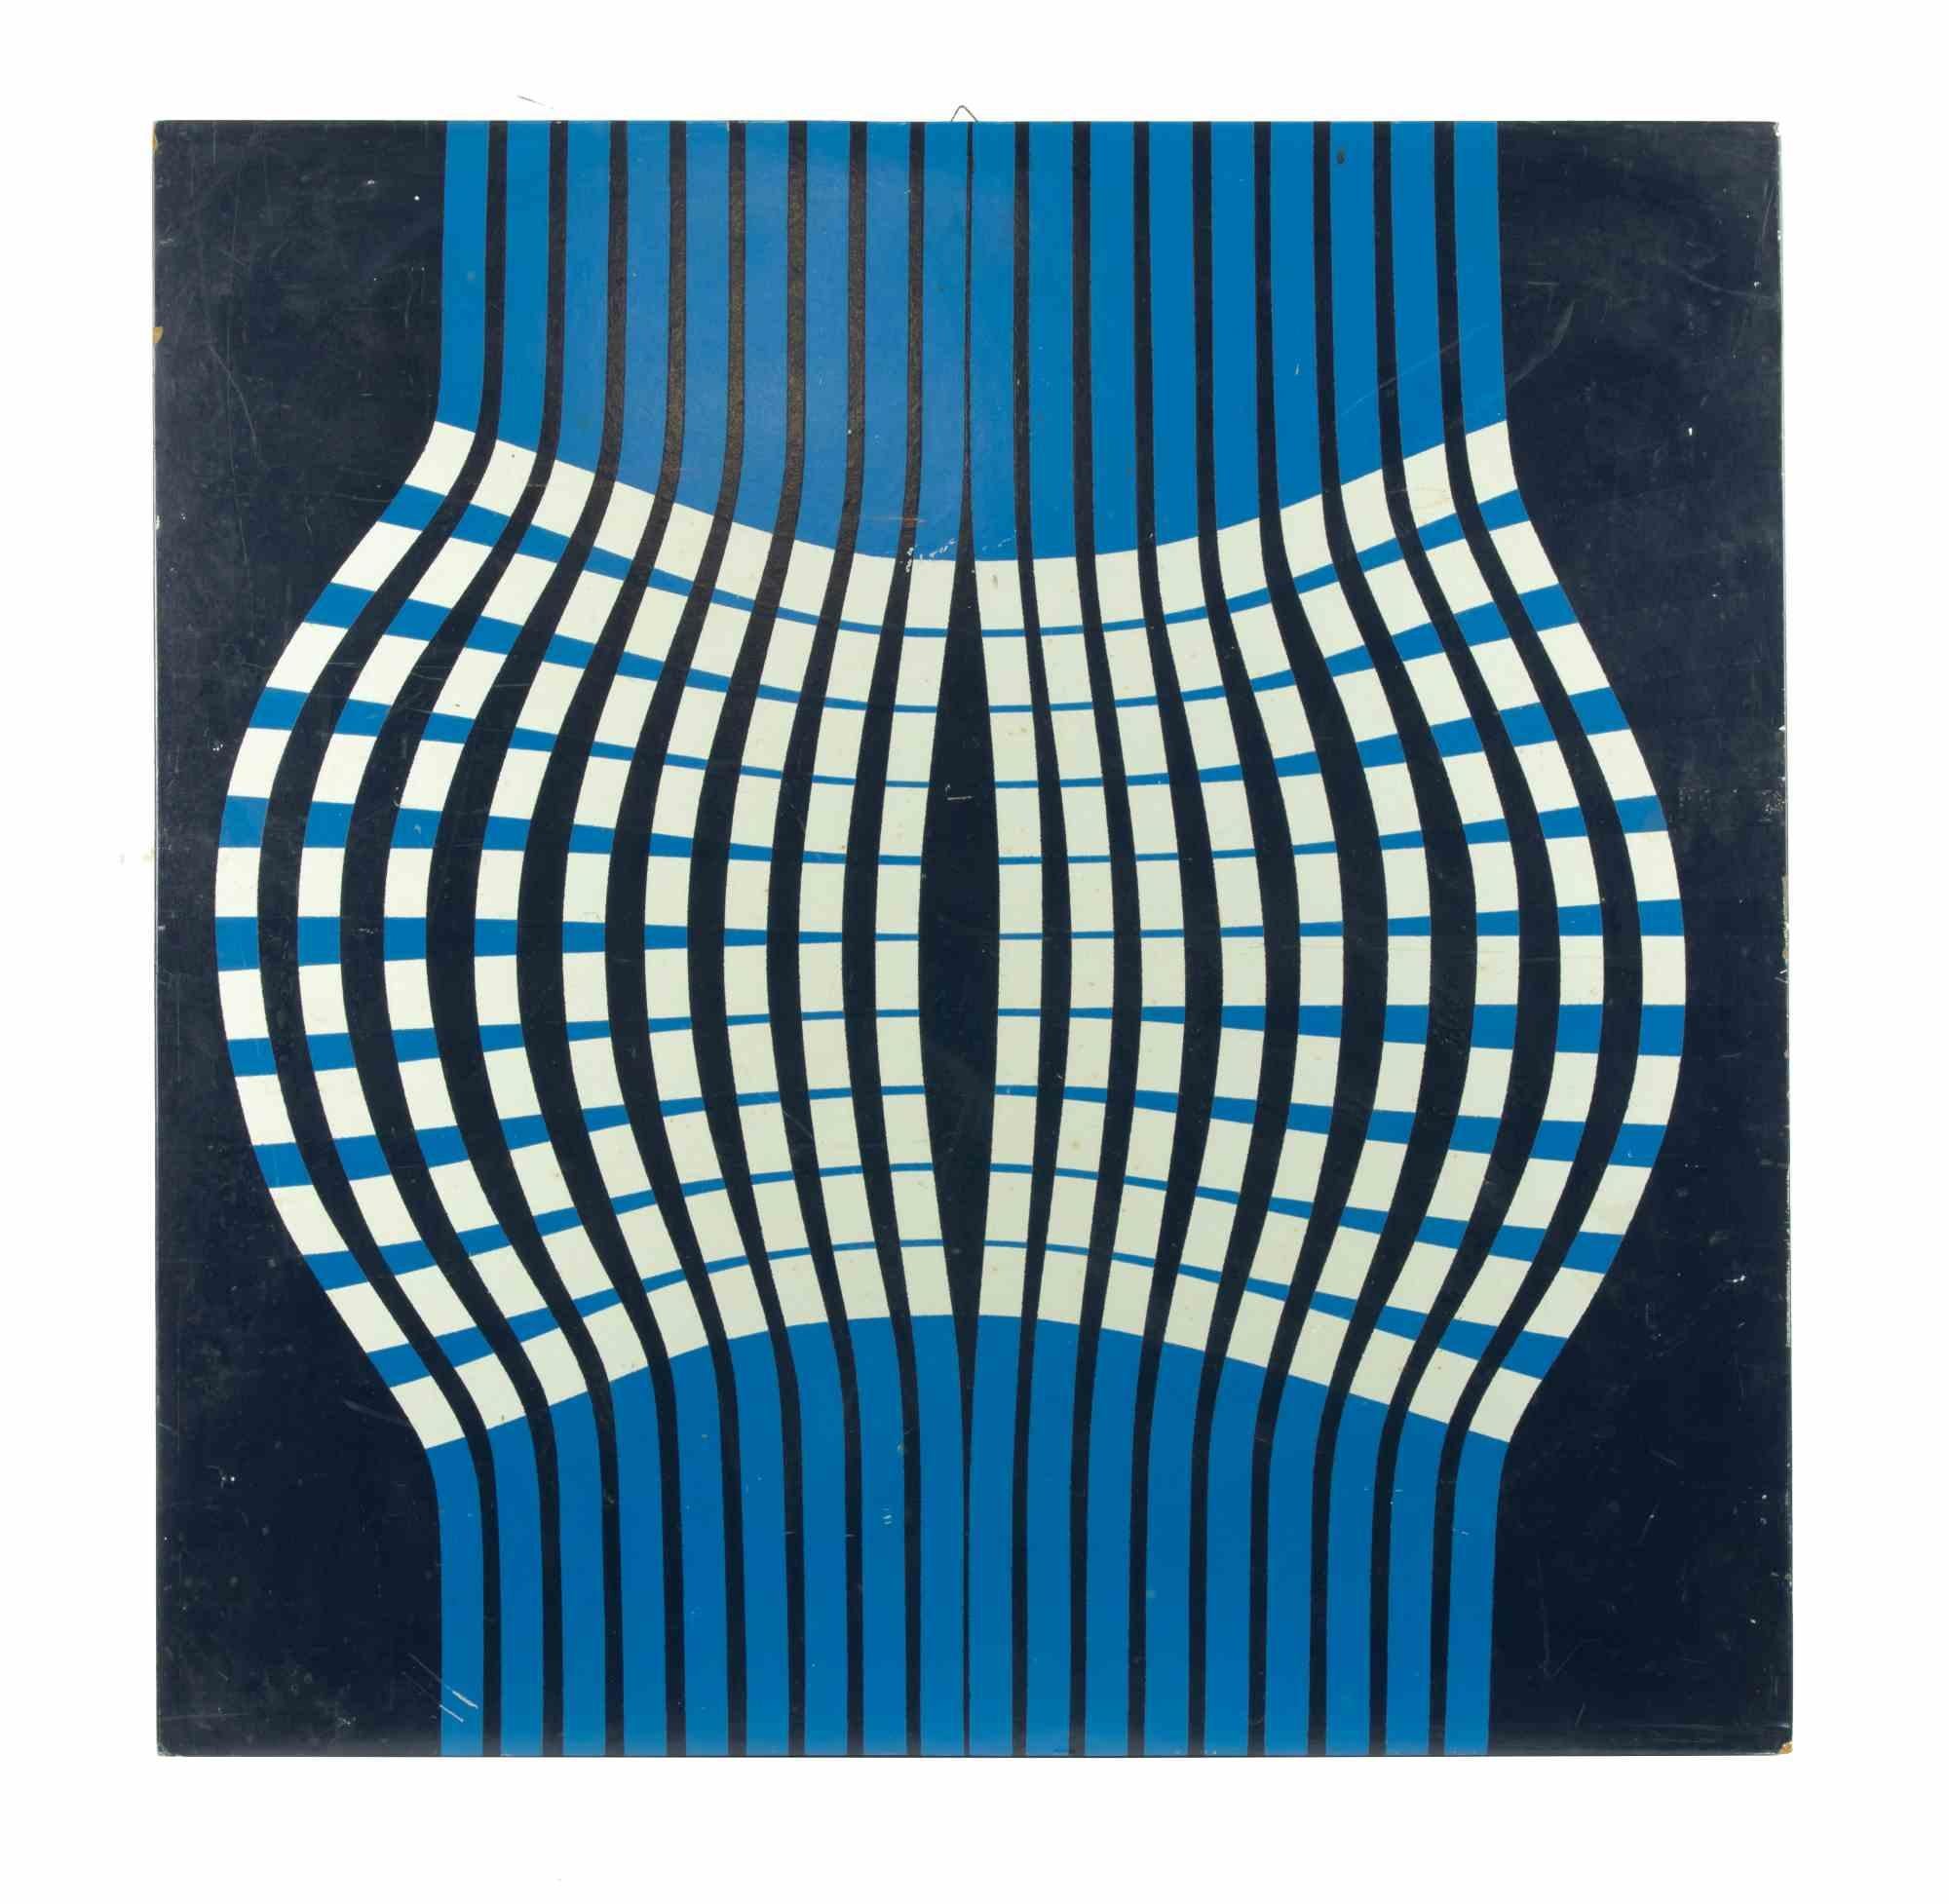 Geometric Composition is an original contemporary artwork realized by Aldo Moriconi in 1967.

Mixed colored enamel on wood.

Hand signed and dated on the back of the artwork.